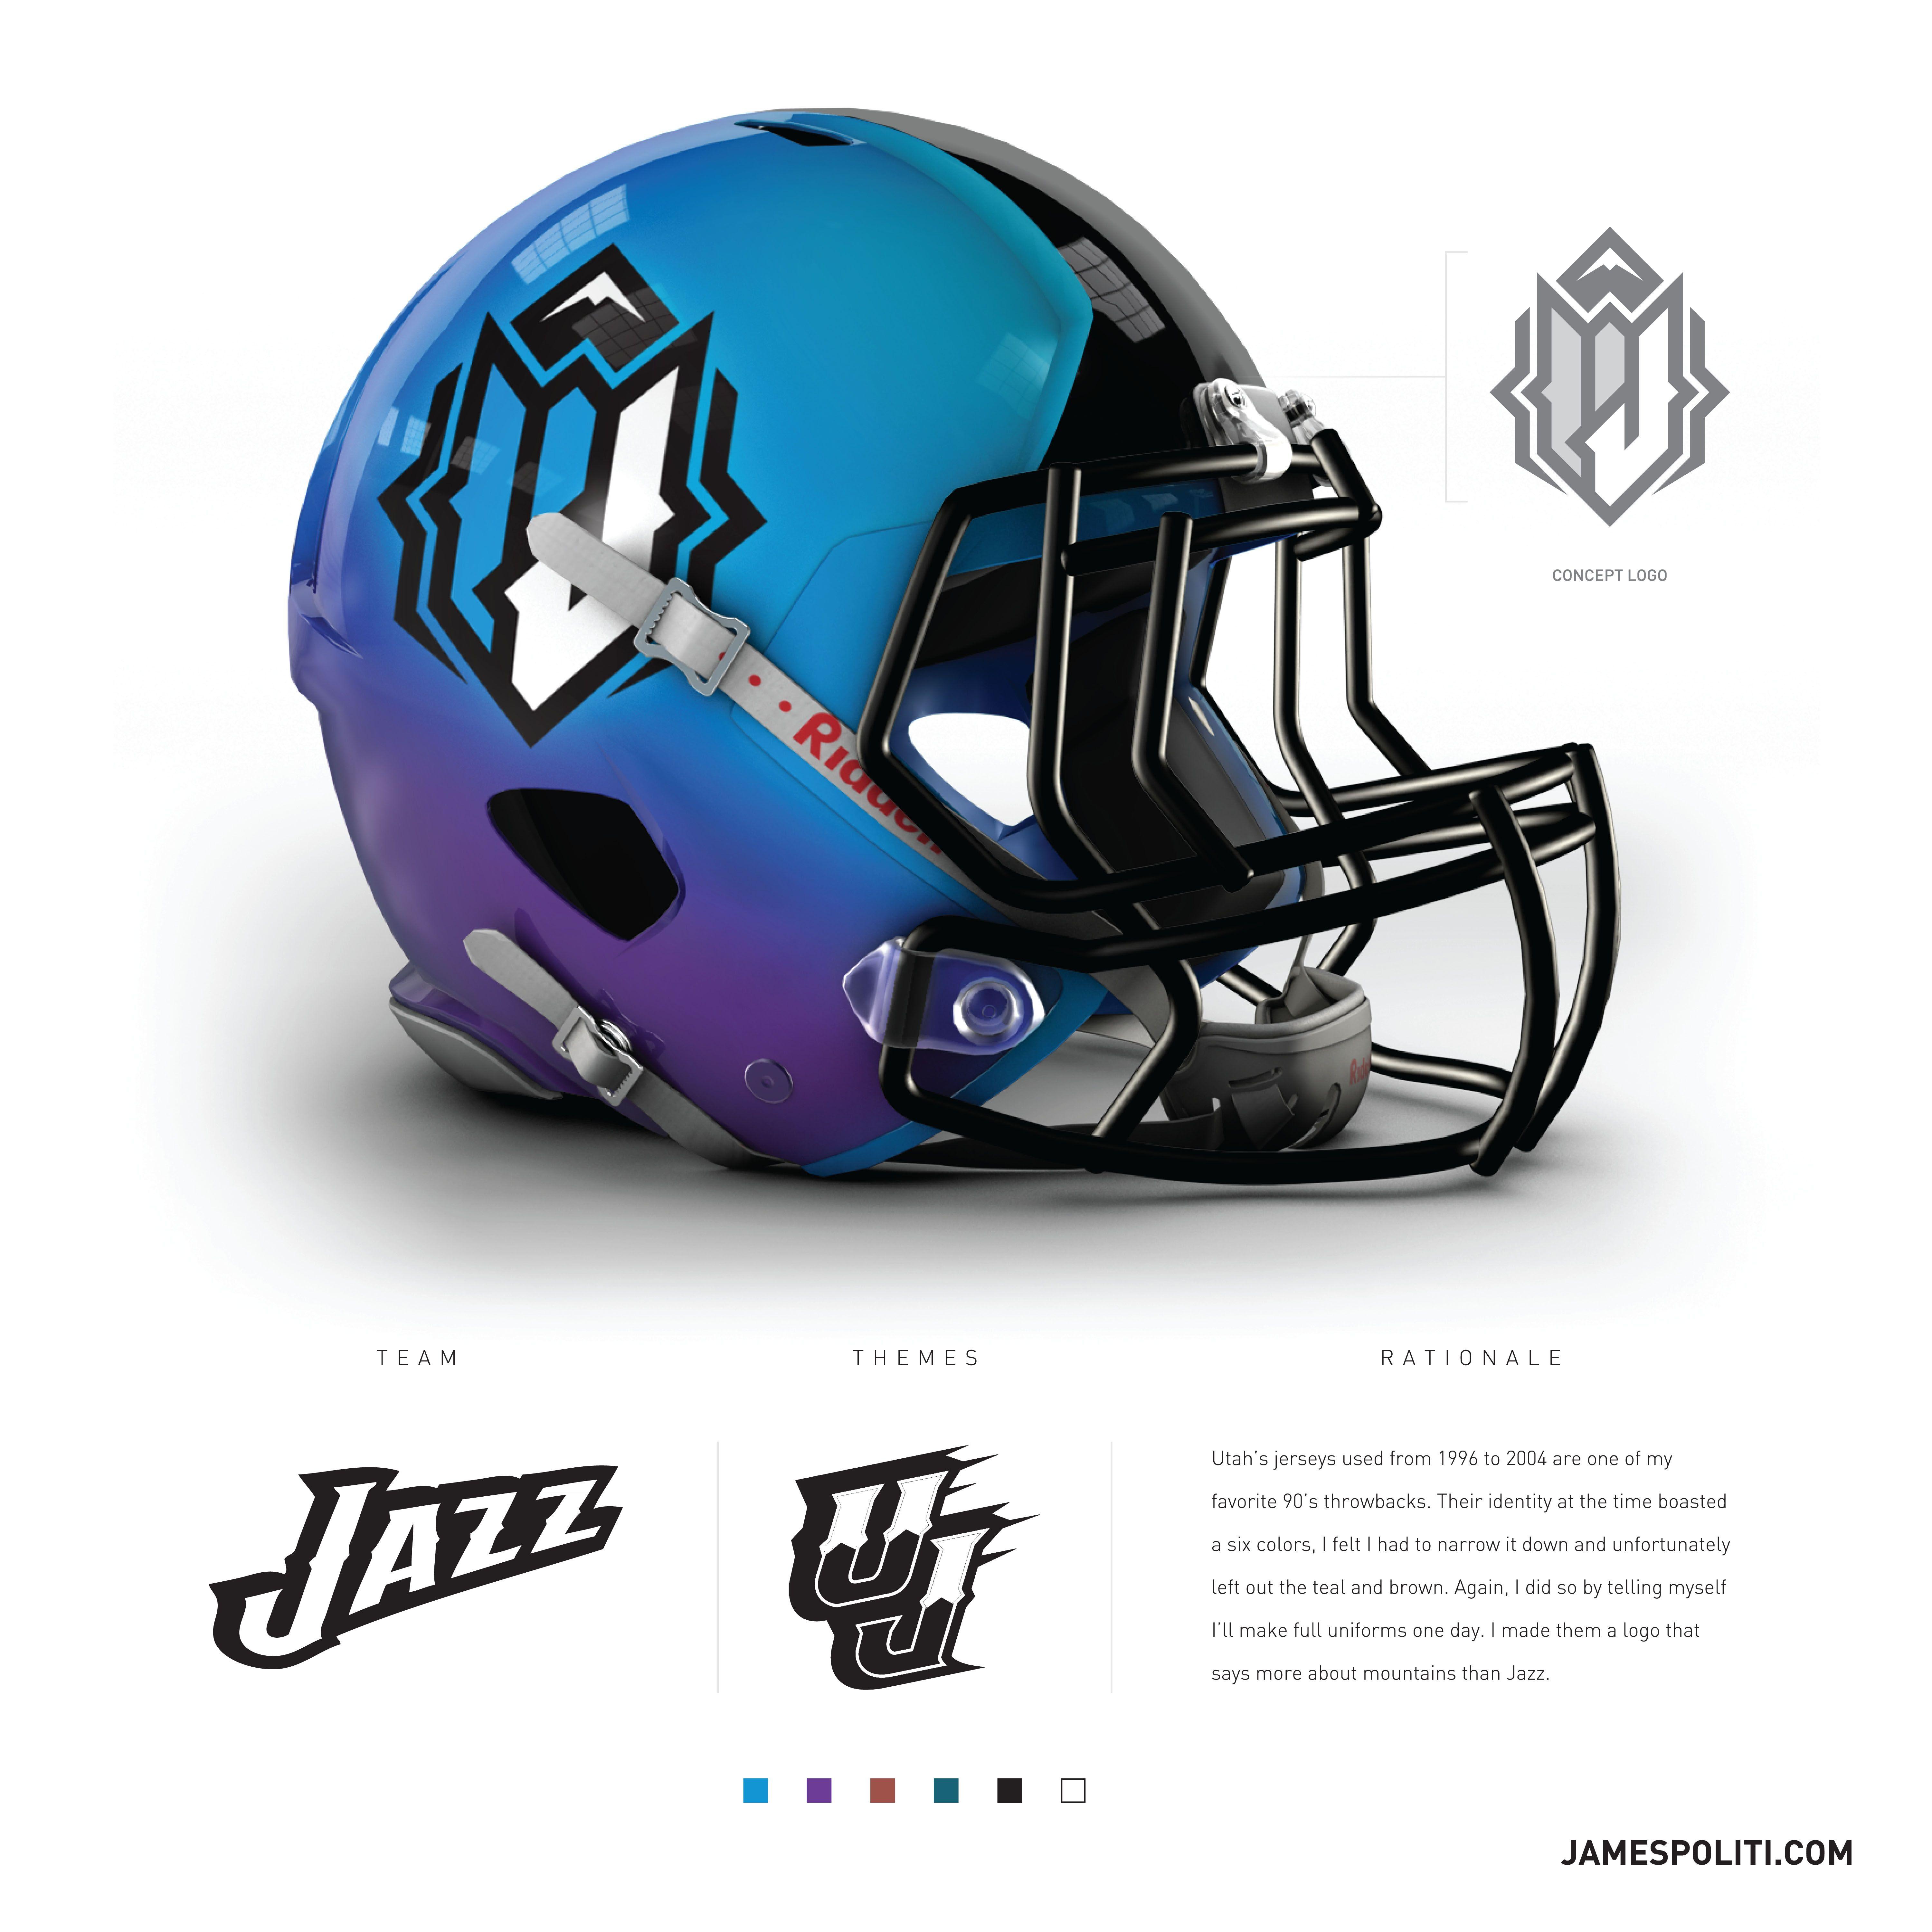 Team Concept Logo - LOOK: All 30 NBA team logos have been re-created as NFL helmets ...